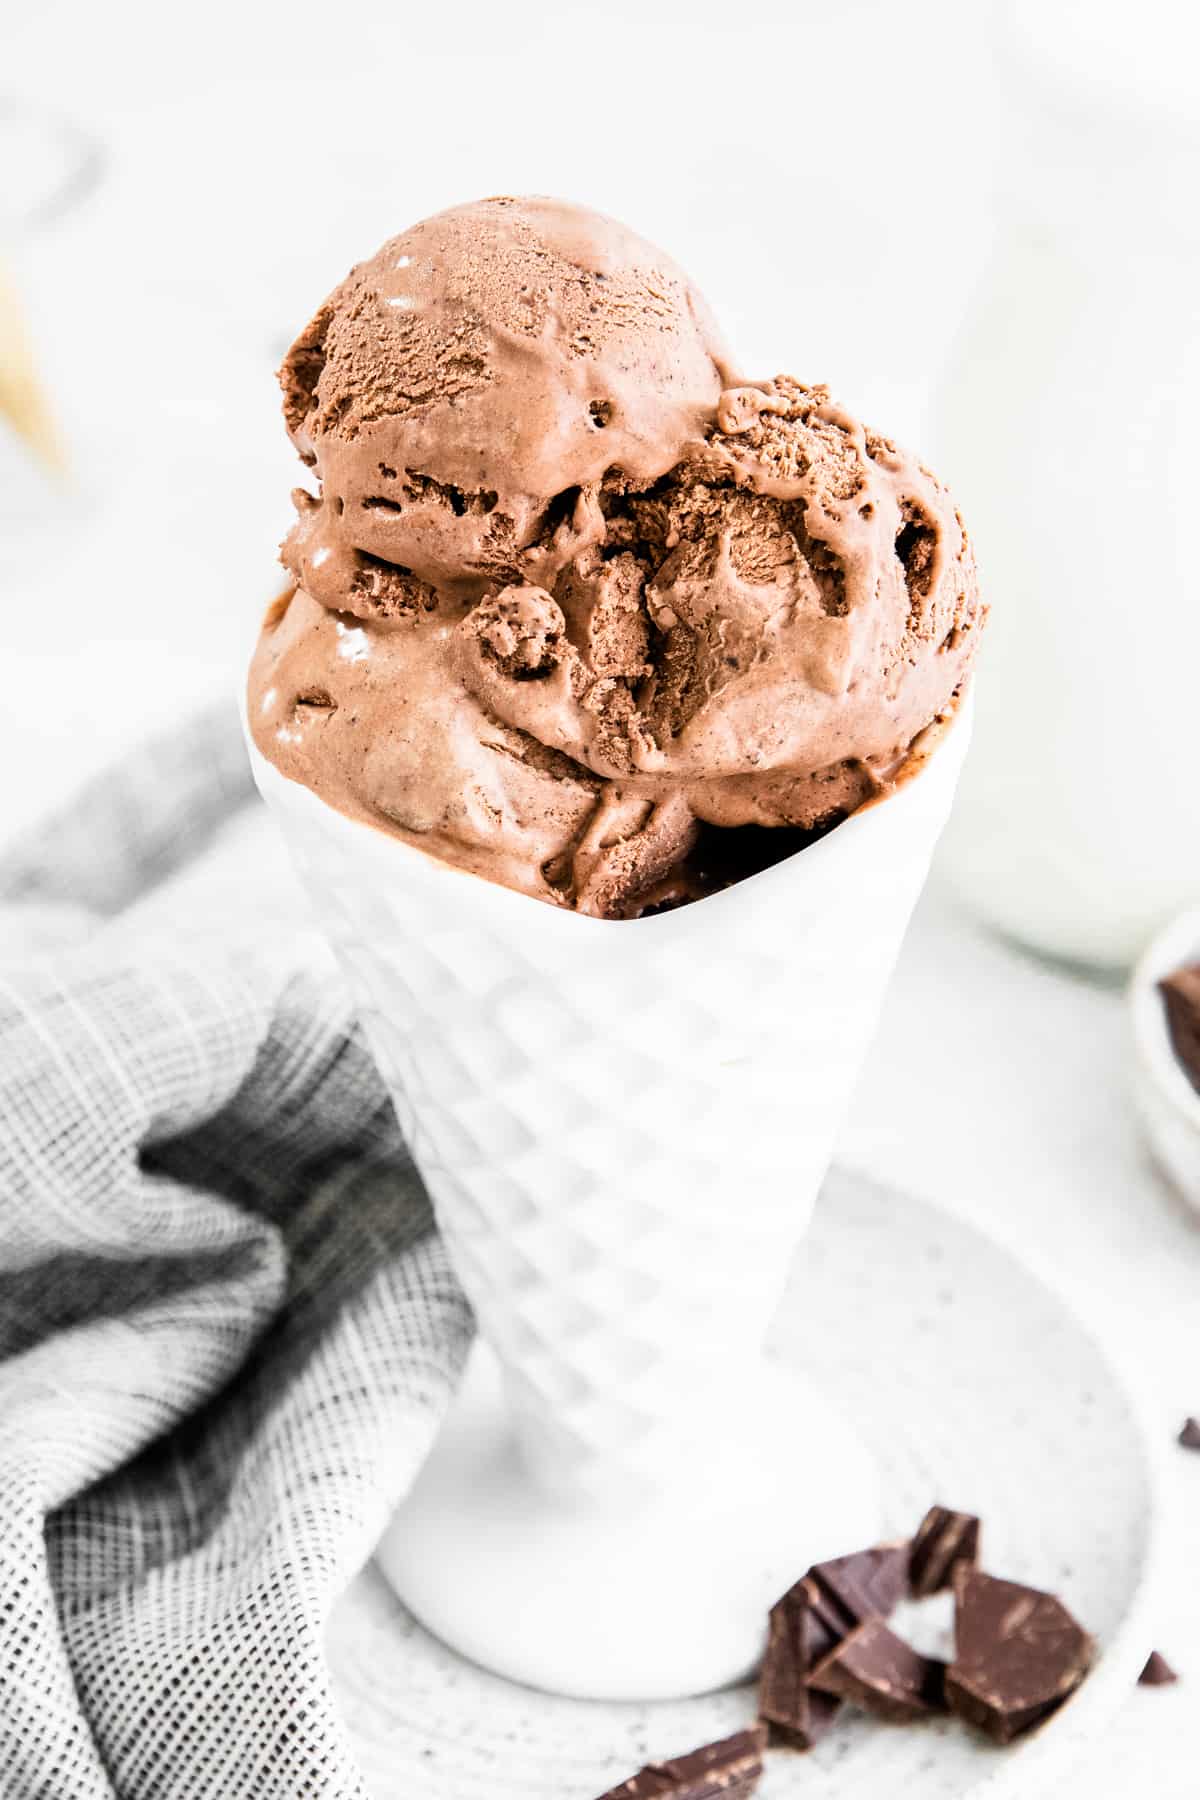 Homemade chocolate ice cream served in ice cream cone shaped bowl. Chopped chocolate and linen can be seen around the bowl as well